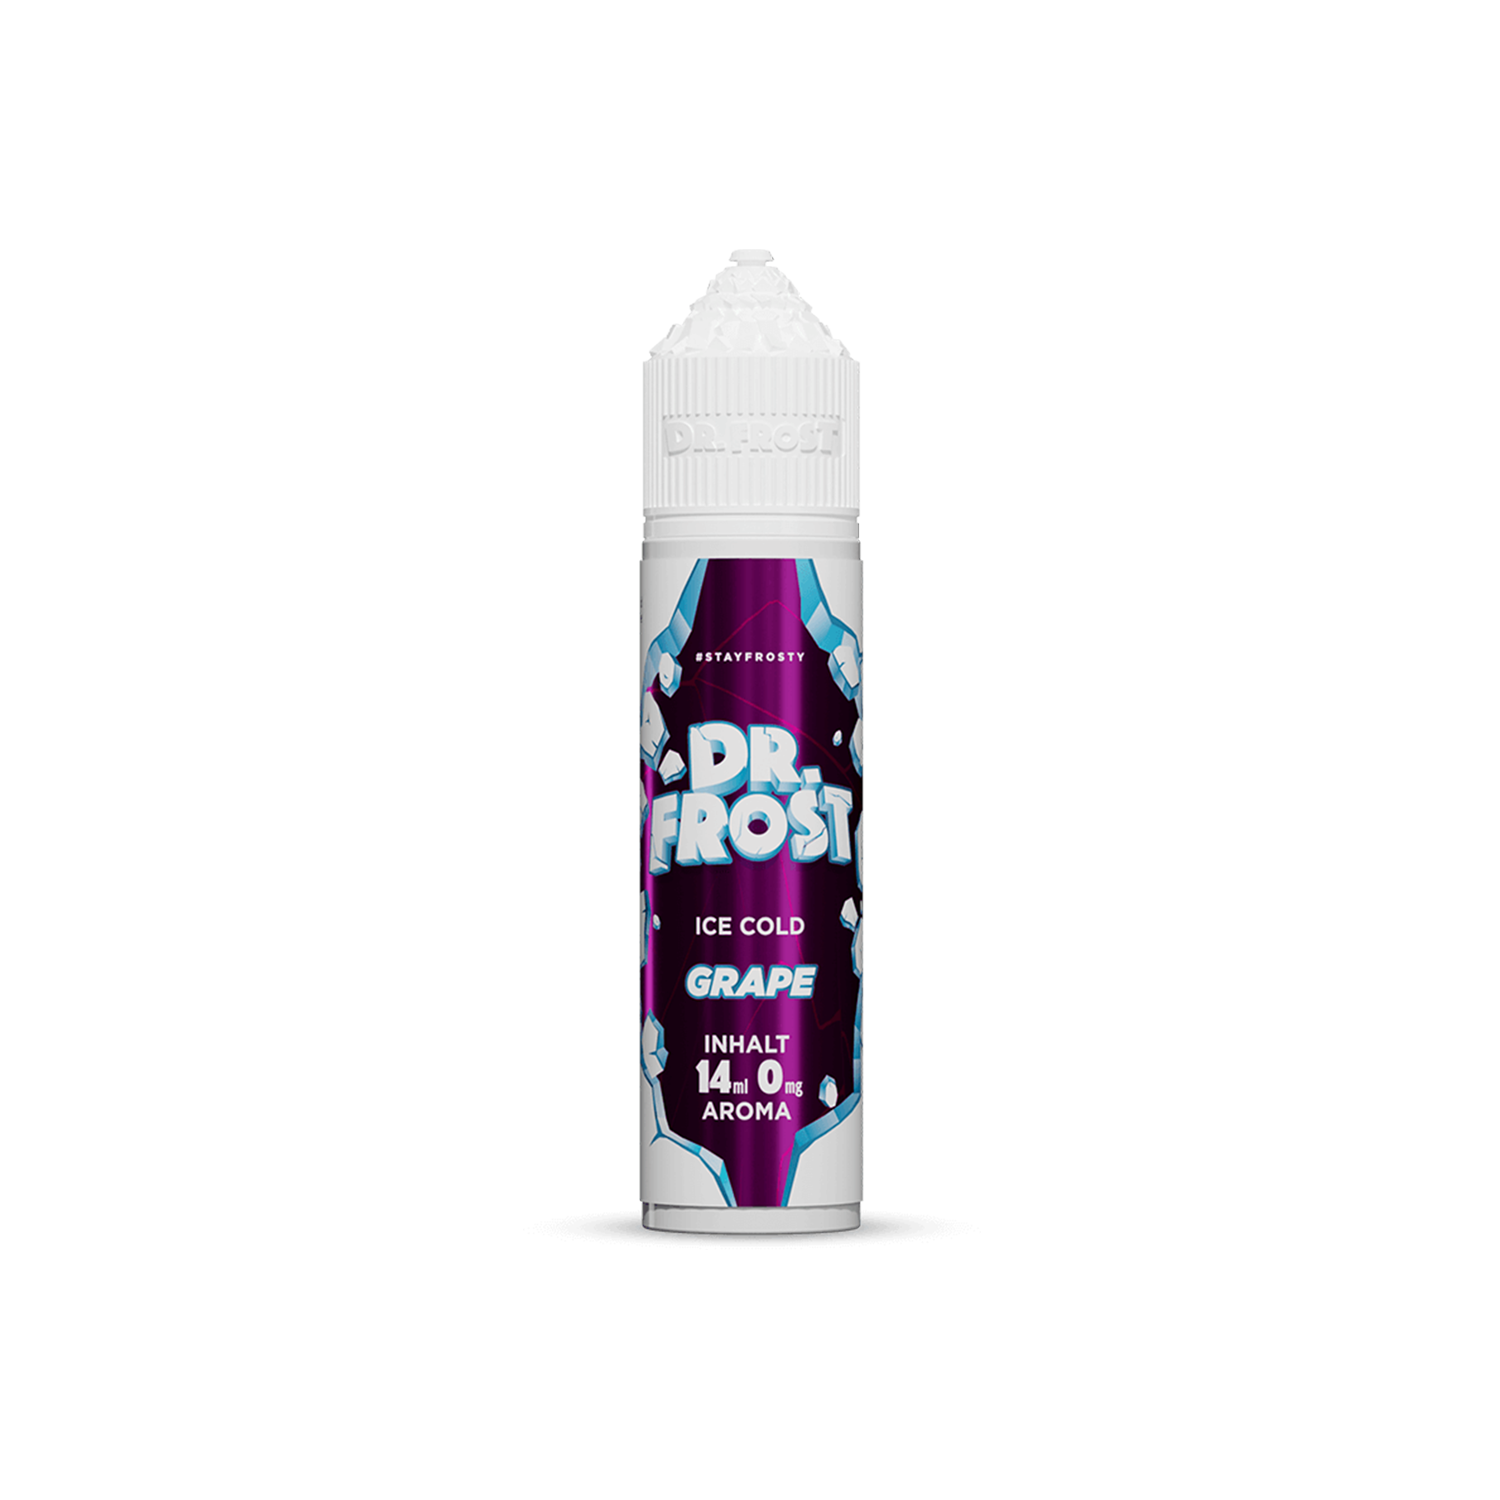 Dr. Frost - Ice Cold - Grape 14ml Aroma 